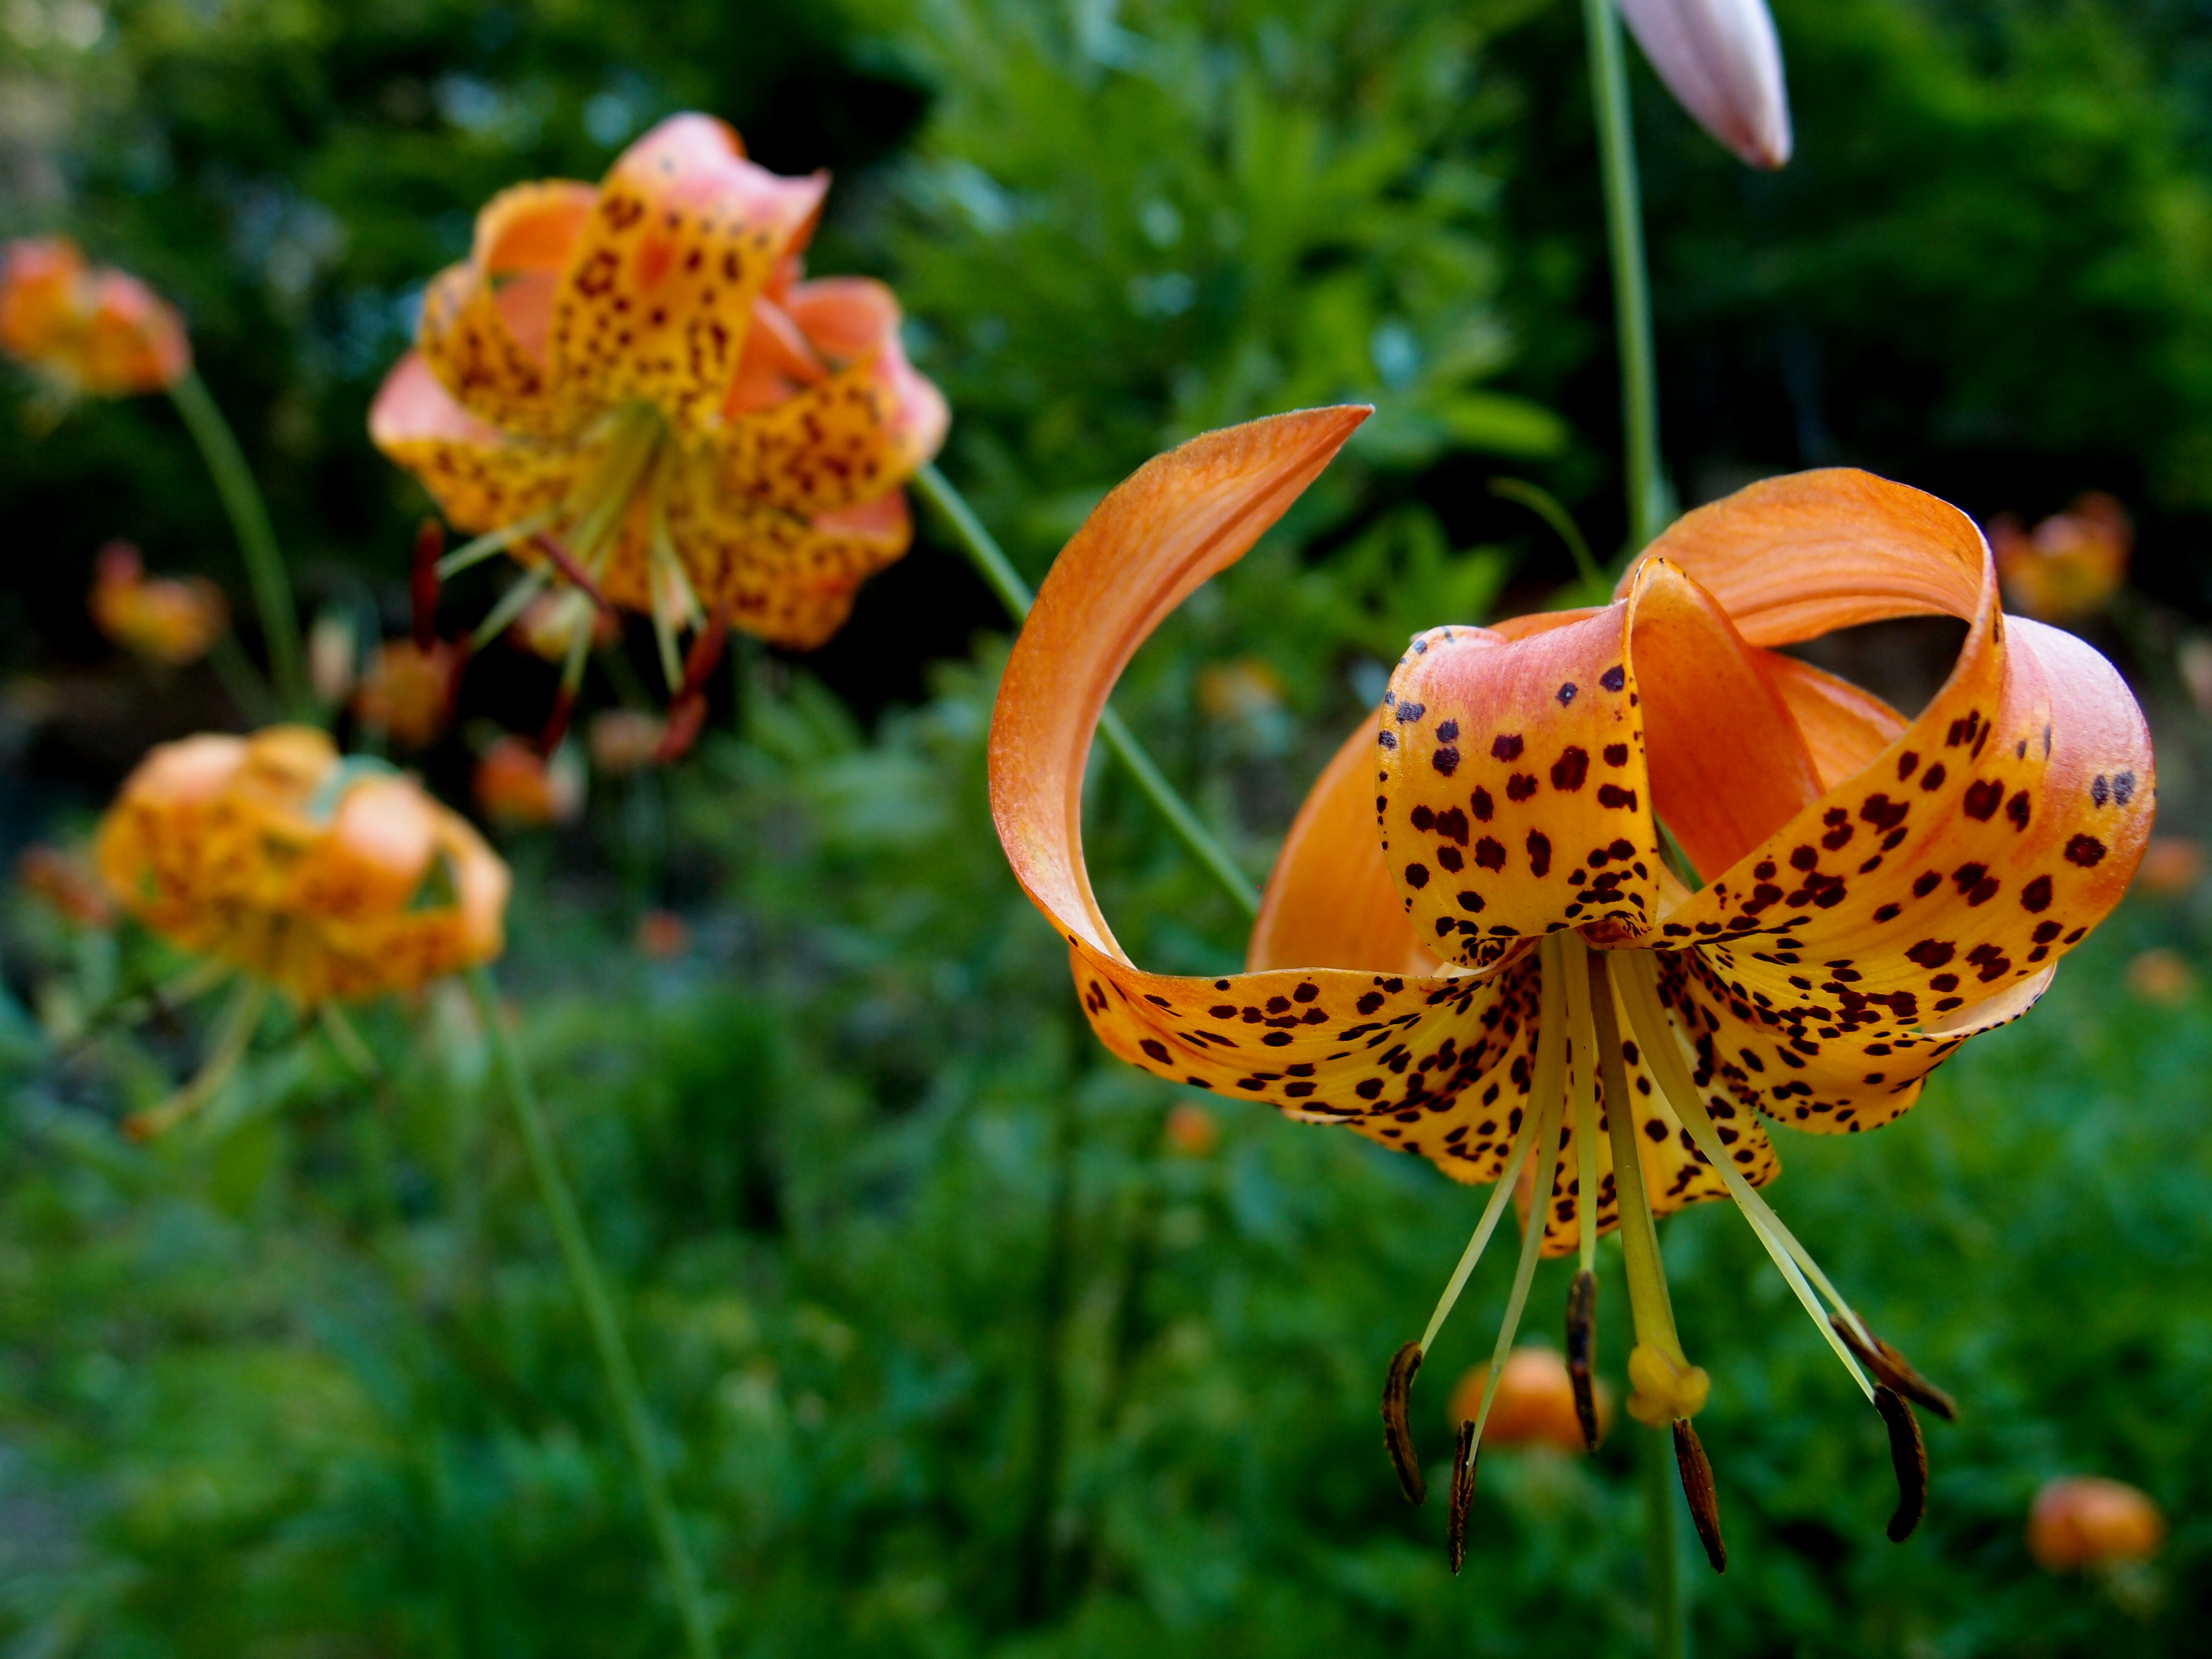 A group of orange lilies in a garden.